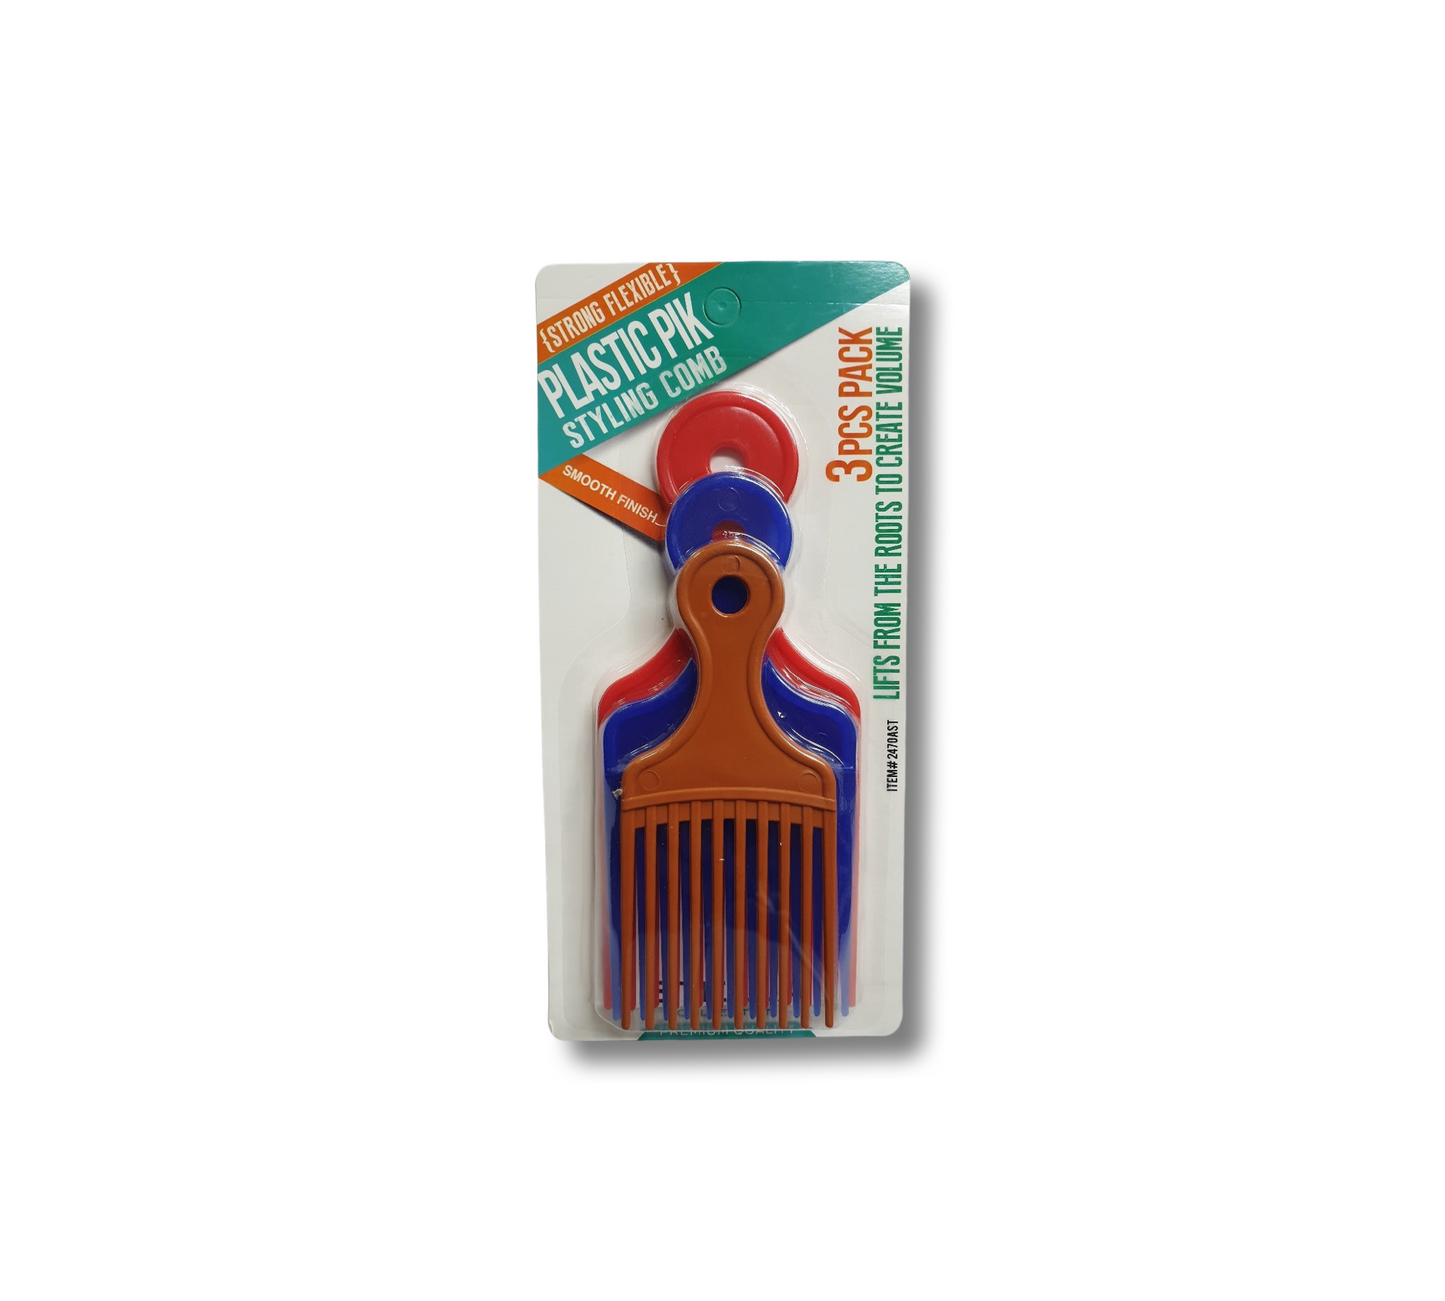 Stella Collection Plastic Pik Styling Comb (3 Pack) #2470Ast